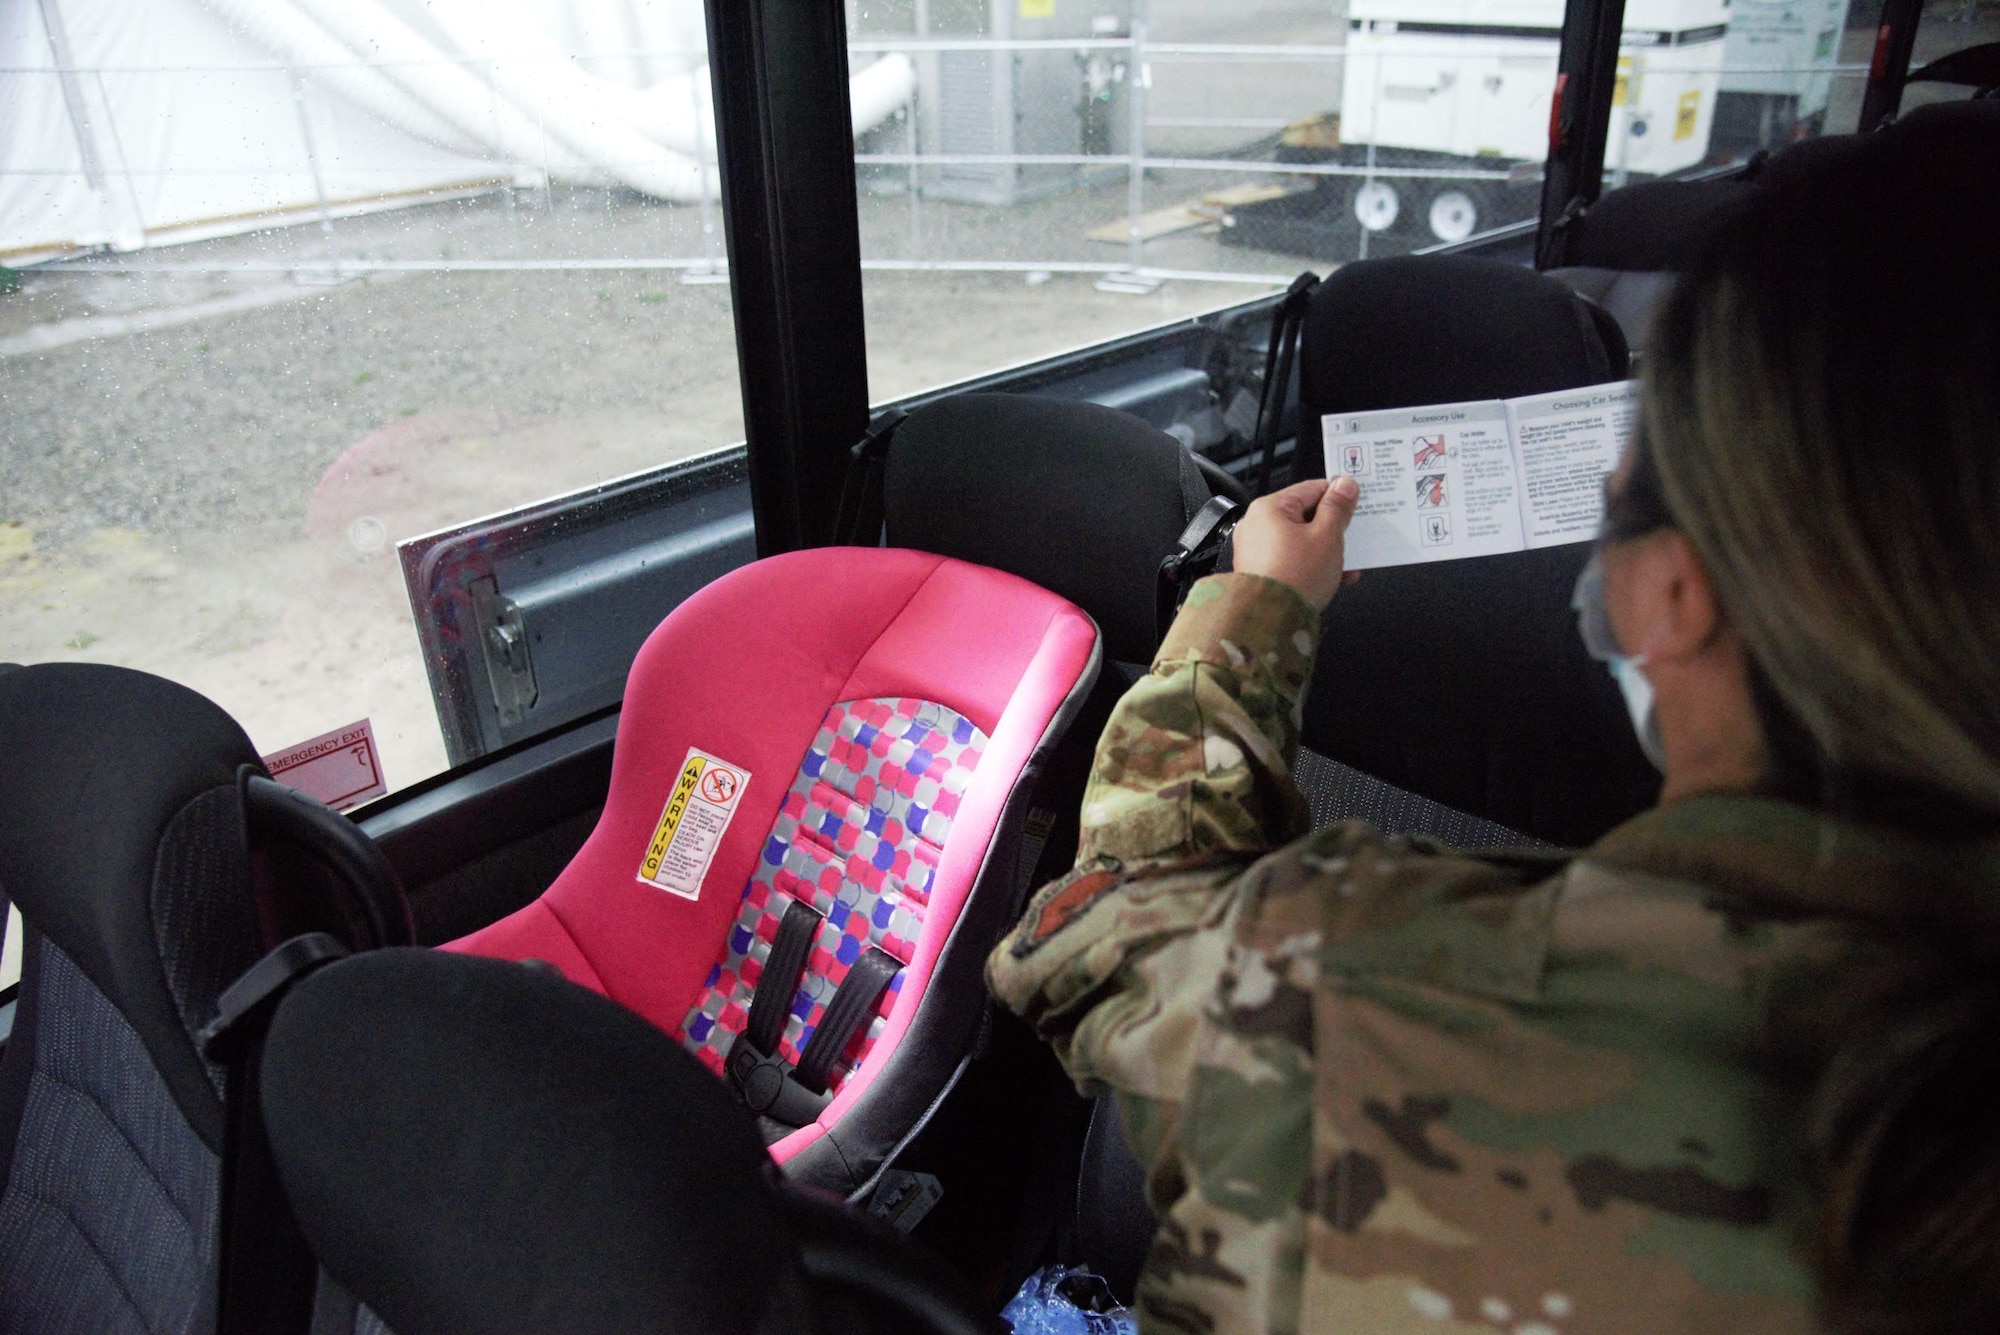 Ensuring safe travel from Aman Omid Village, military members install car seats for Afghan families with small children on Holloman Air Force Base, New Mexico, Sept 30,2021. The Department of Defense, through U.S. Northern Command, and in support of the Department of State and Department of Homeland Security, is providing transportation, temporary housing, medical screening, and general support for at least 50,000 Afghan evacuees at suitable facilities, in permanent or temporary structures, as quickly as possible. This initiative provides Afghan evacuees essential support at secure locations outside Afghanistan. (U.S. Navy photo by Mass Communications Specialist 1st Class Sarah Rolin)